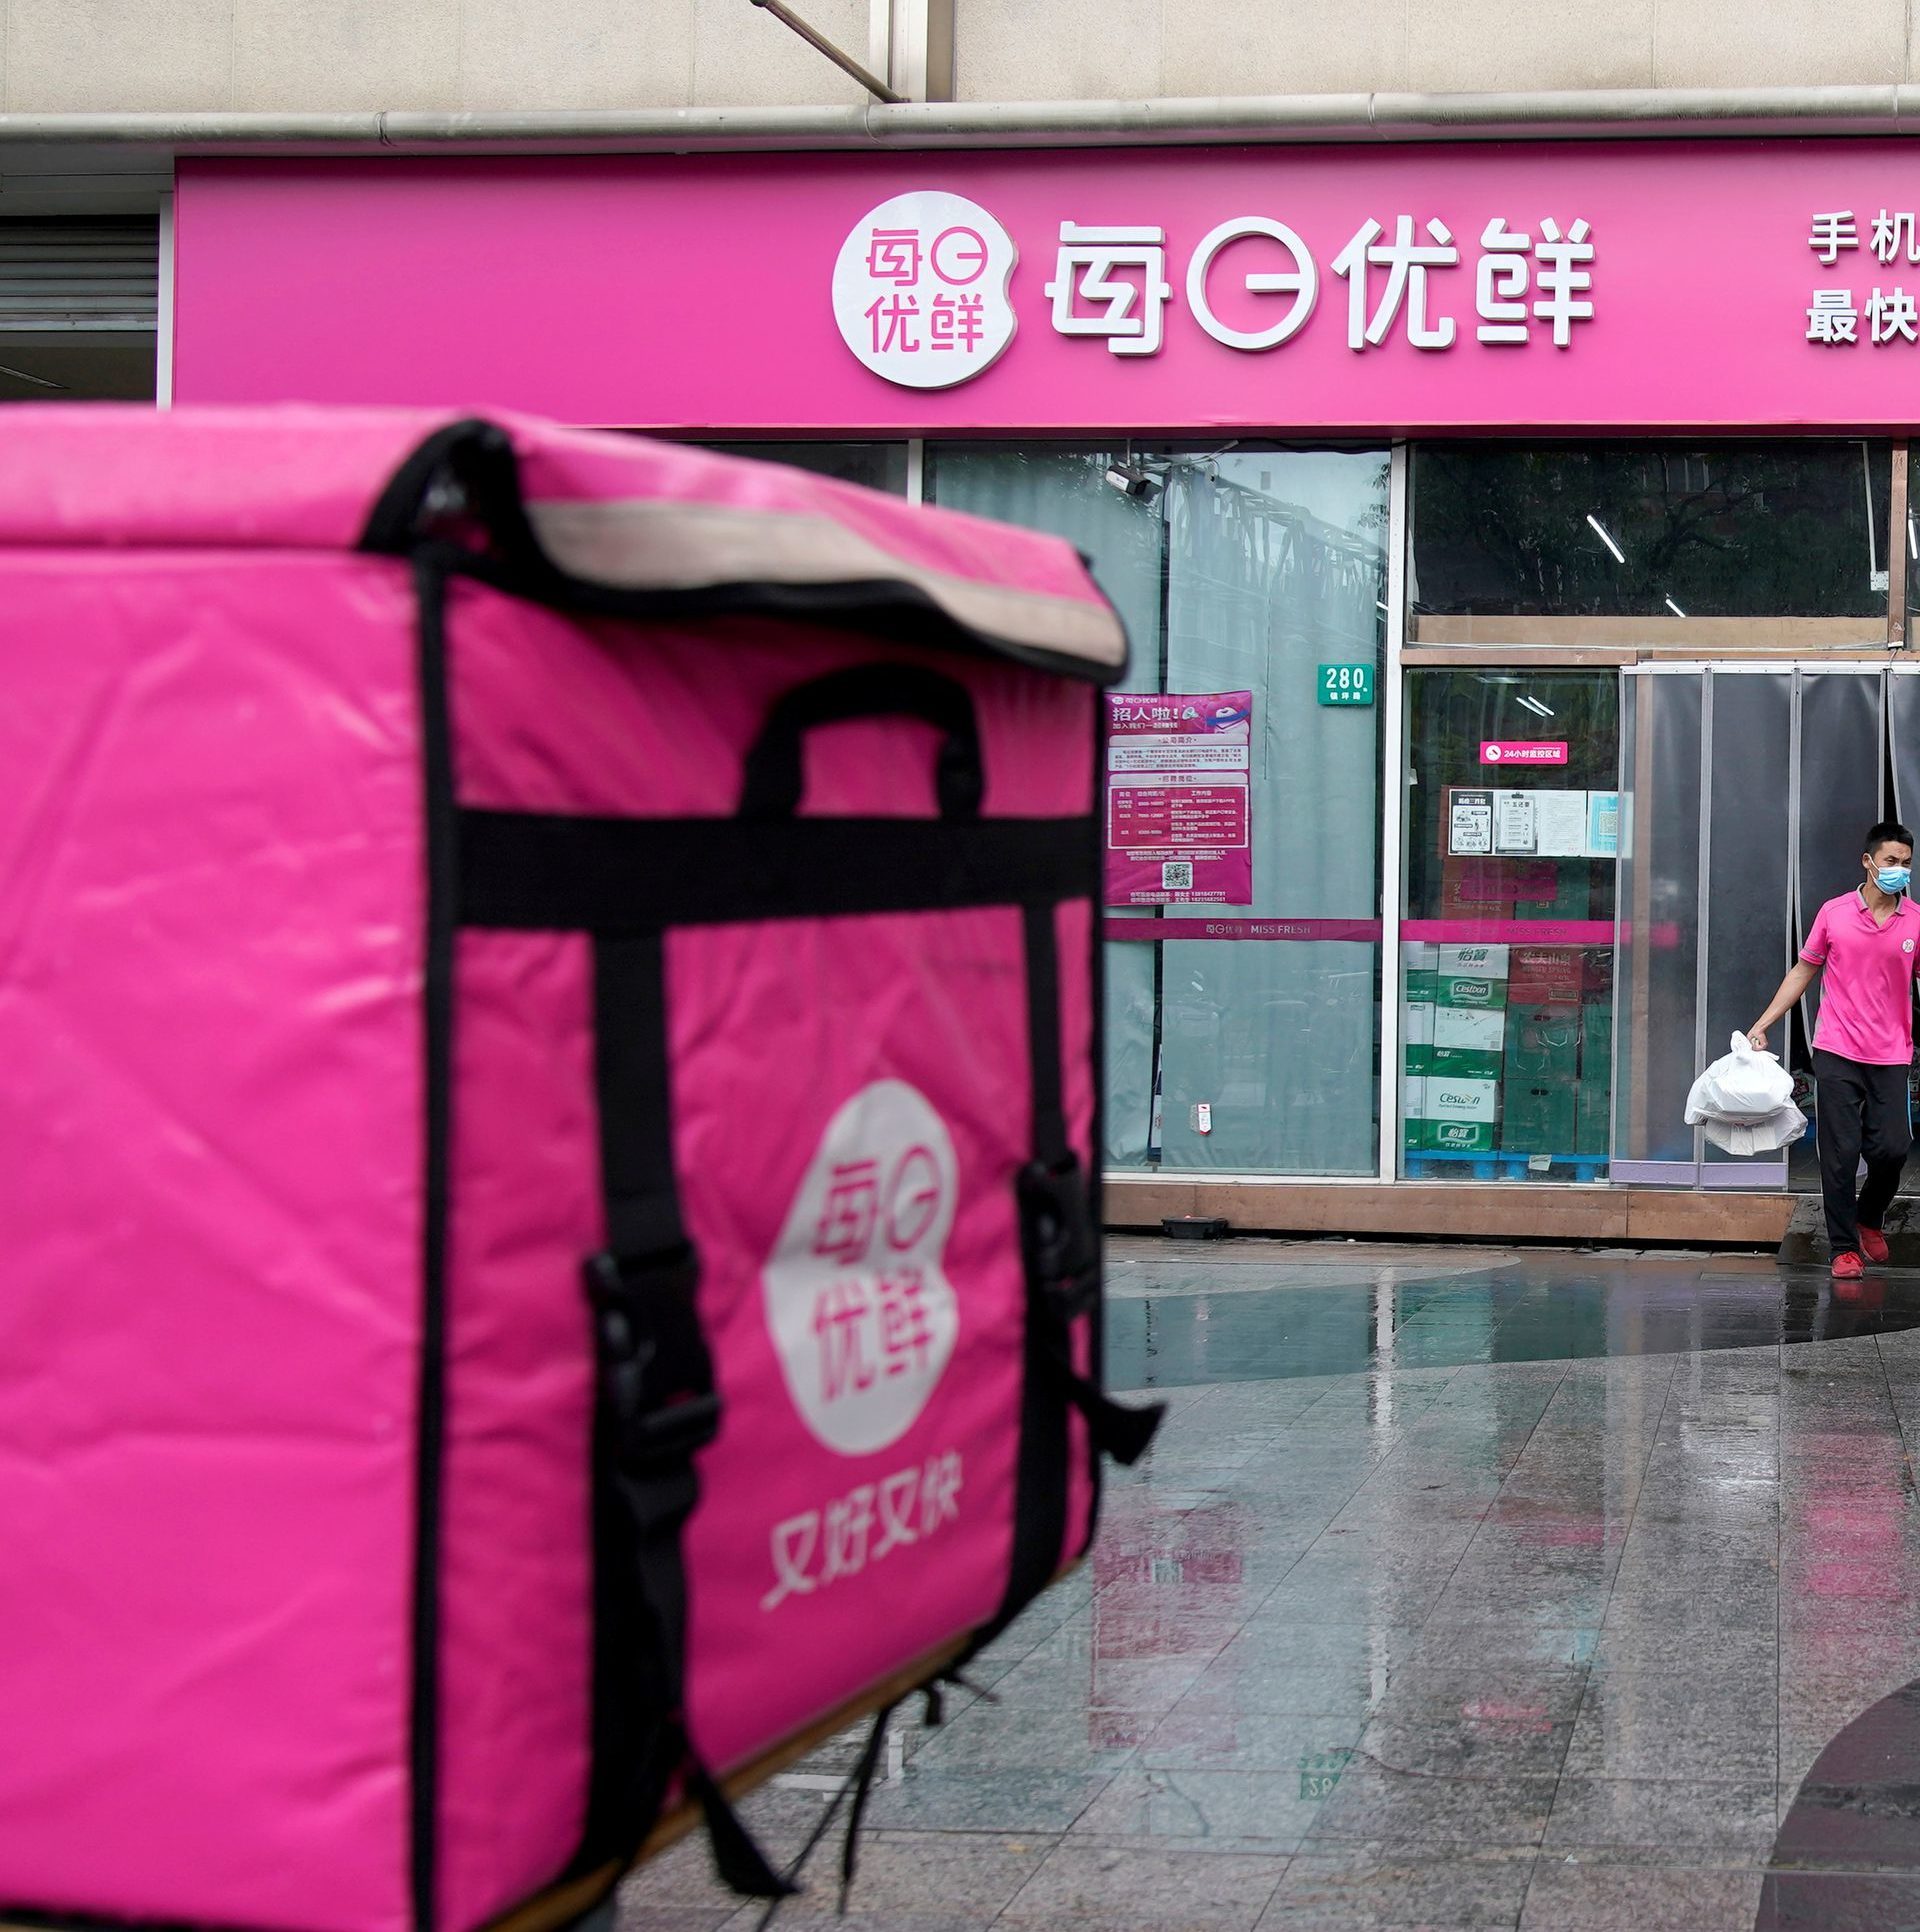 Beijing consumer rights group summons grocery firm Missfresh over complaints